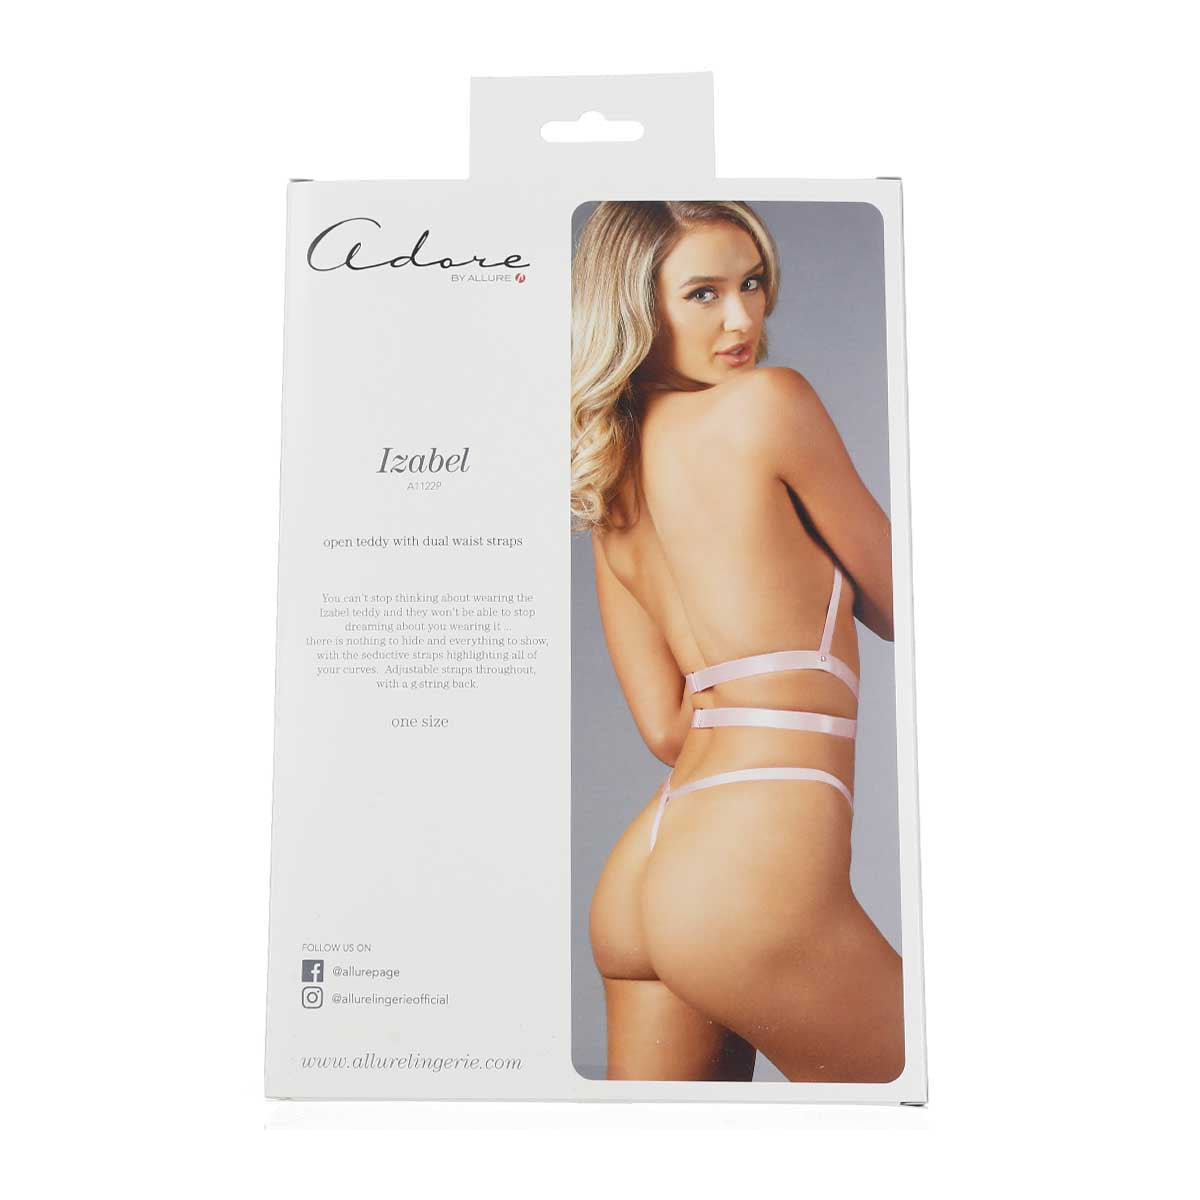 Adore By Allure - Izabel - Open Teddy With Dual Waist Straps - Pink - OS